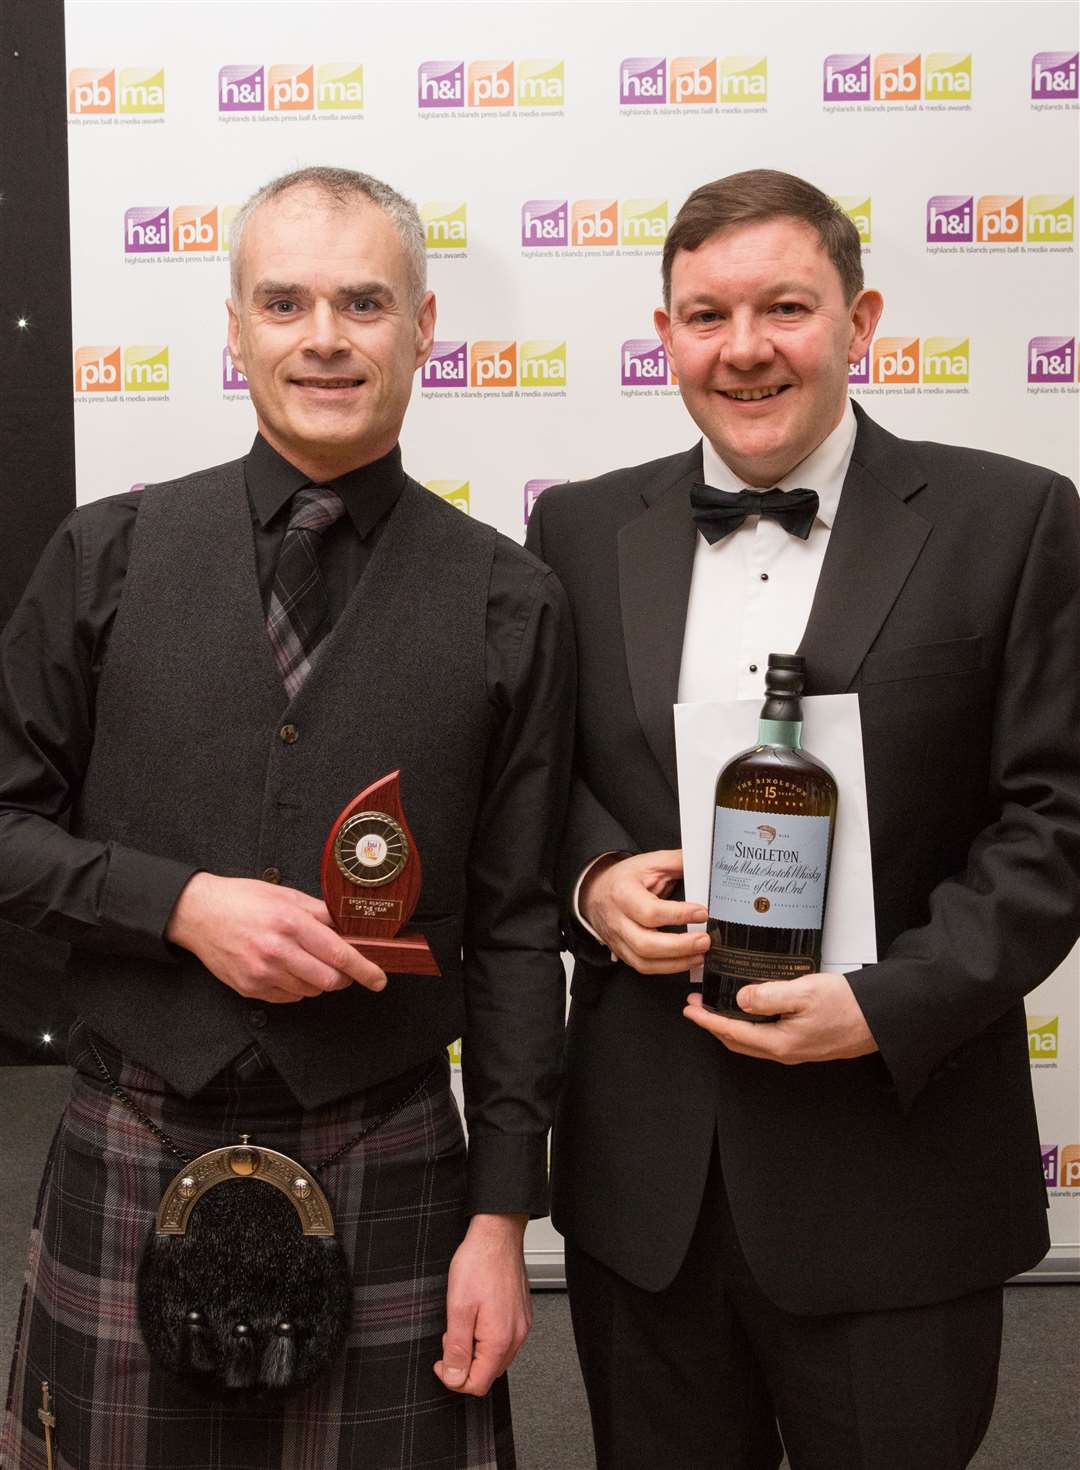 Craig Christie (left) won the Sports Reporter of the Year title in 2017.